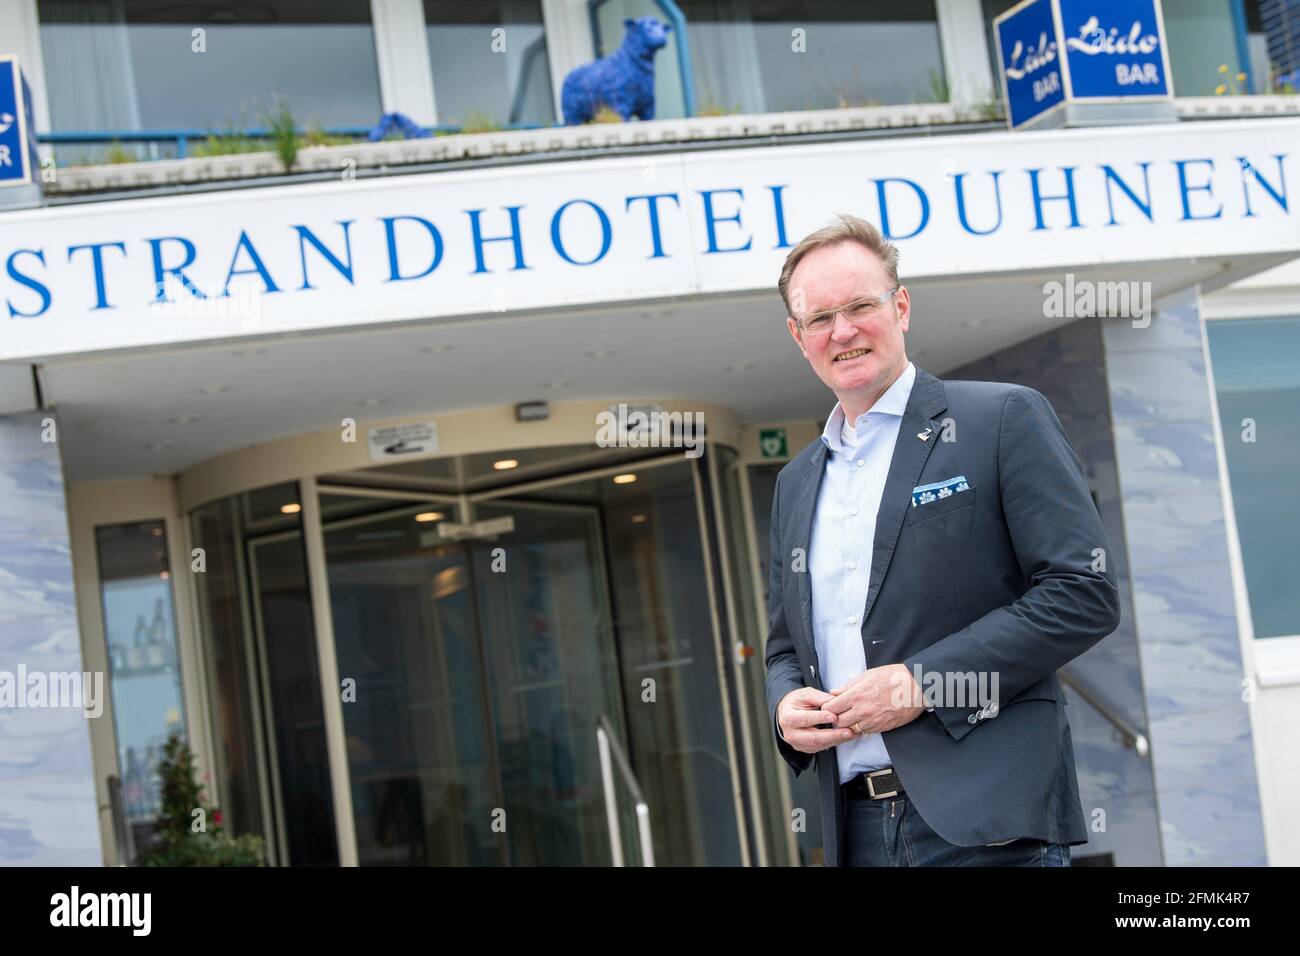 Cuxhaven, Germany. 10th May, 2021. Kristian Kamp, chairman of the Cuxhaven  Dehoga and operator of the Strandhotel Duhnen, stands in front of the hotel.  Hotels, holiday apartments and other accommodation in regions